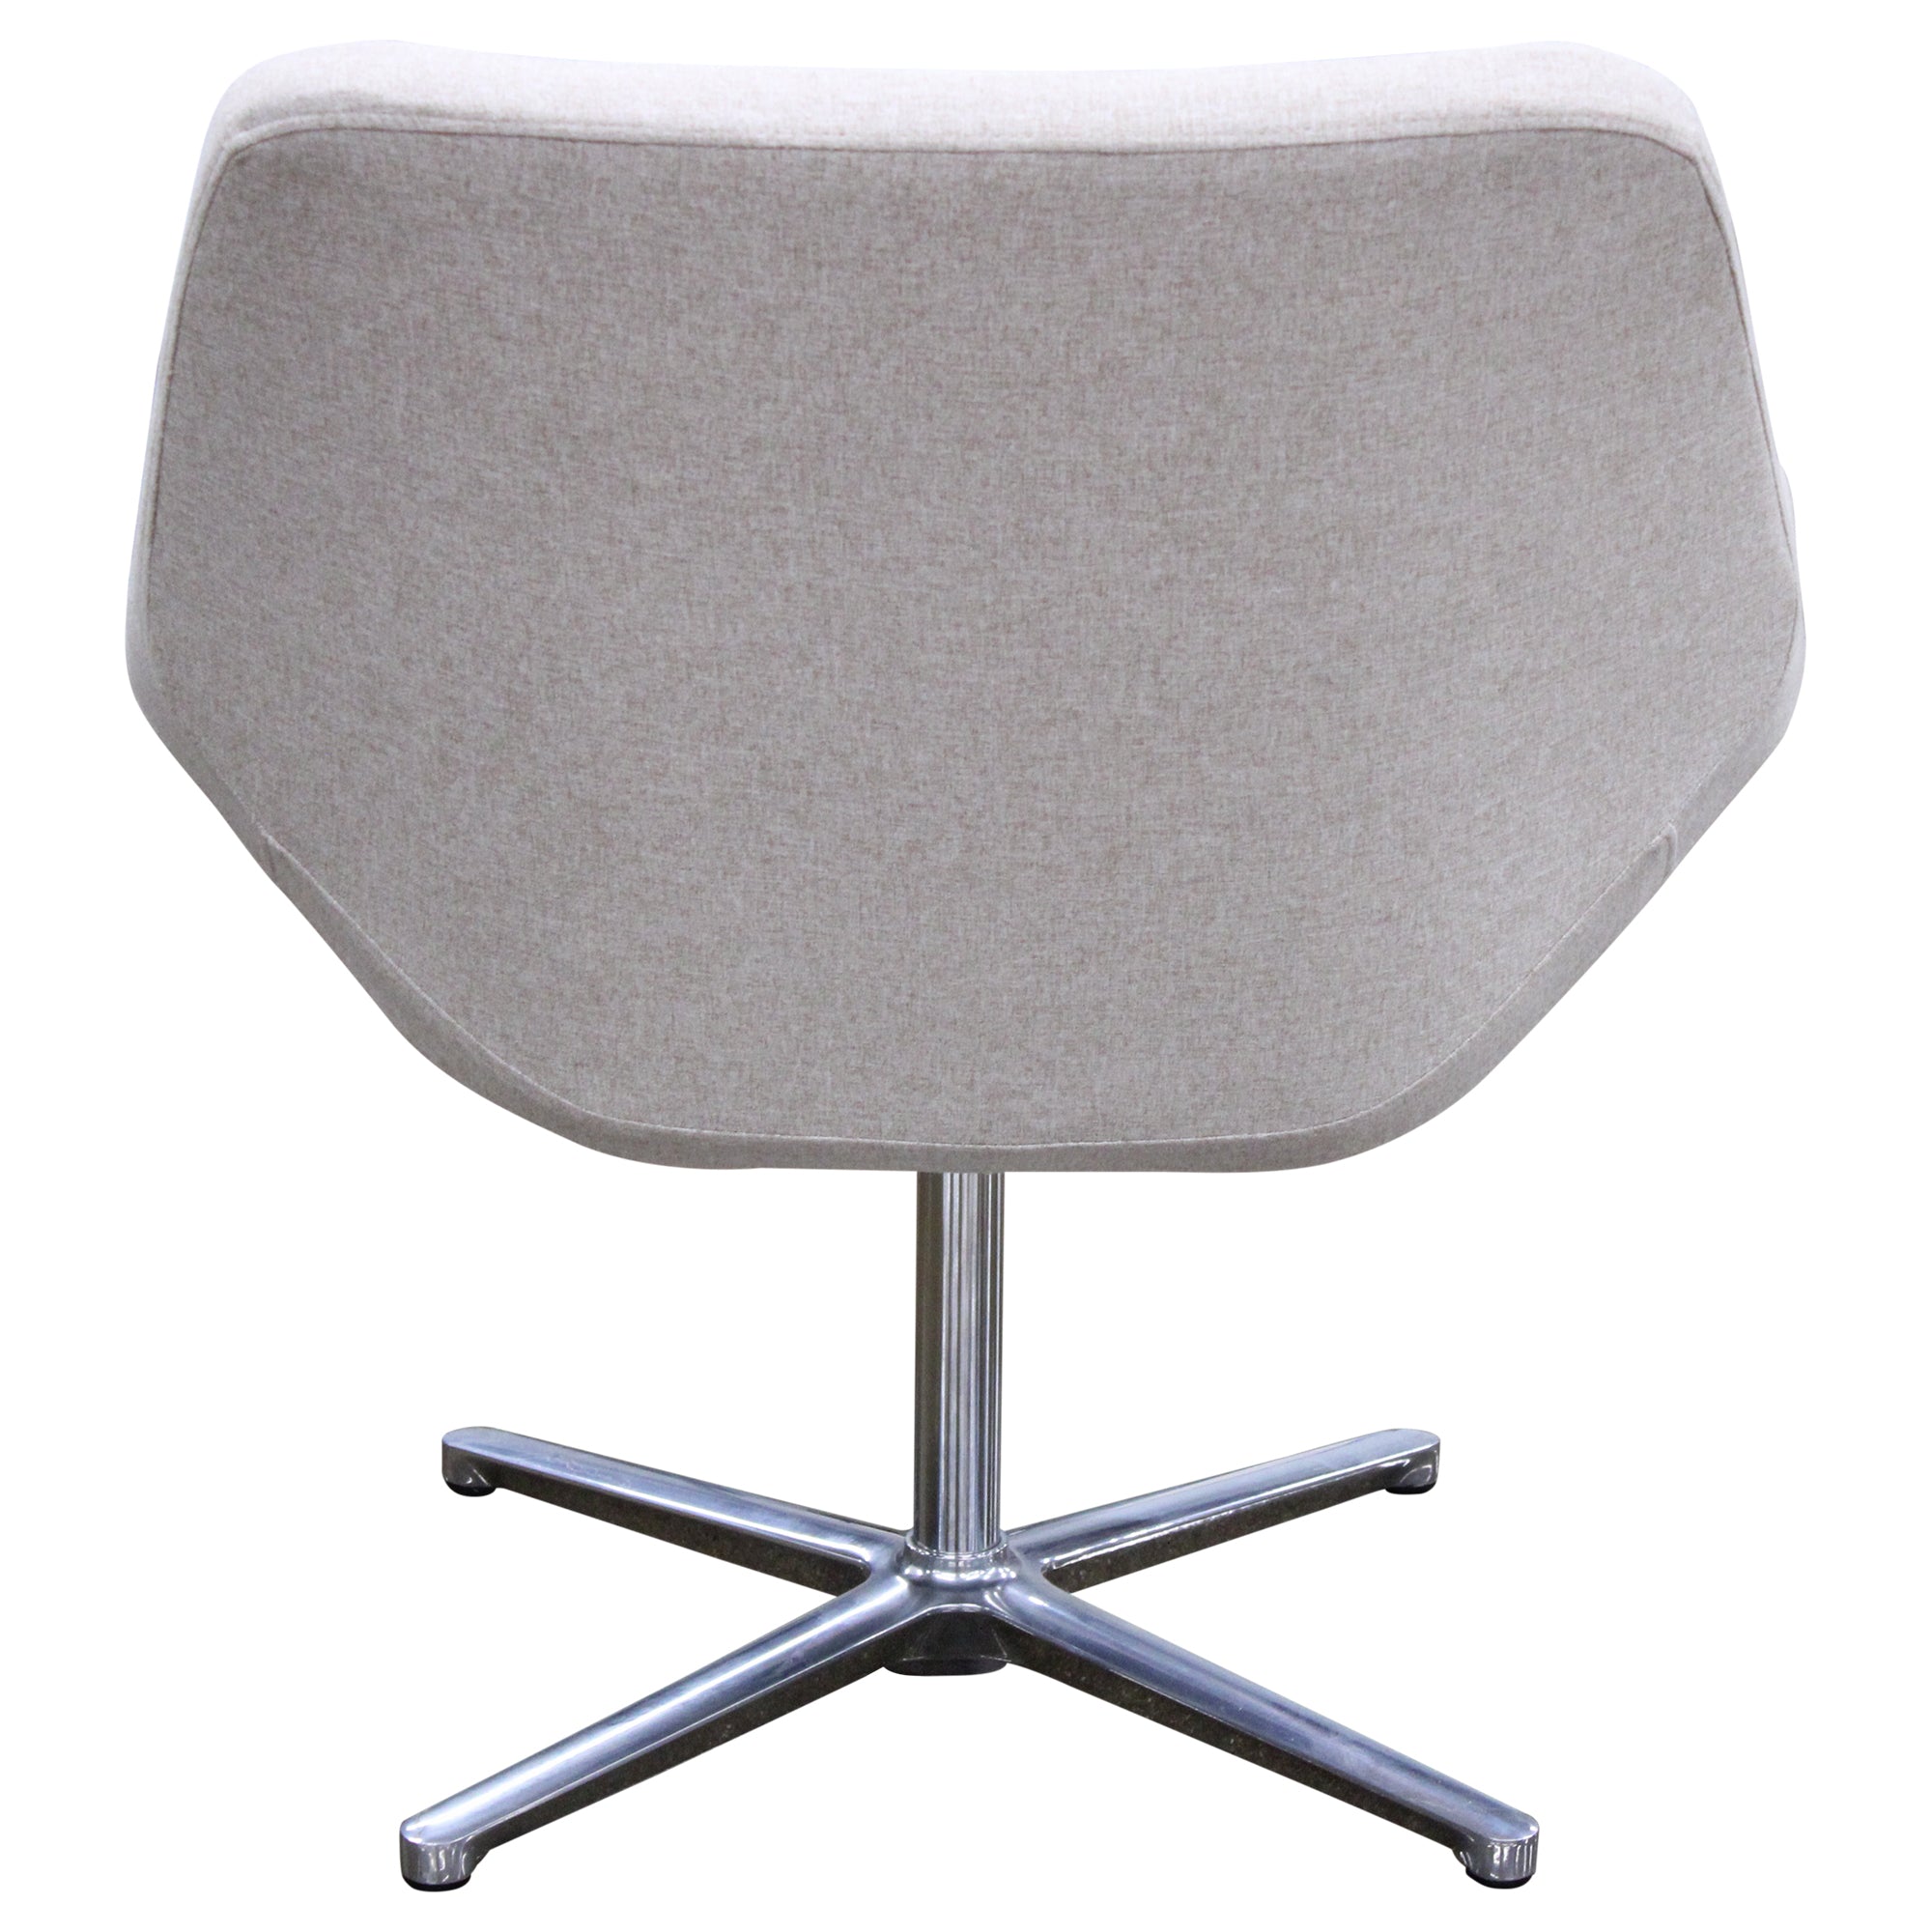 Keilhauer Cahoots Side Chair w/ Swivel Base, Cream - Preowned